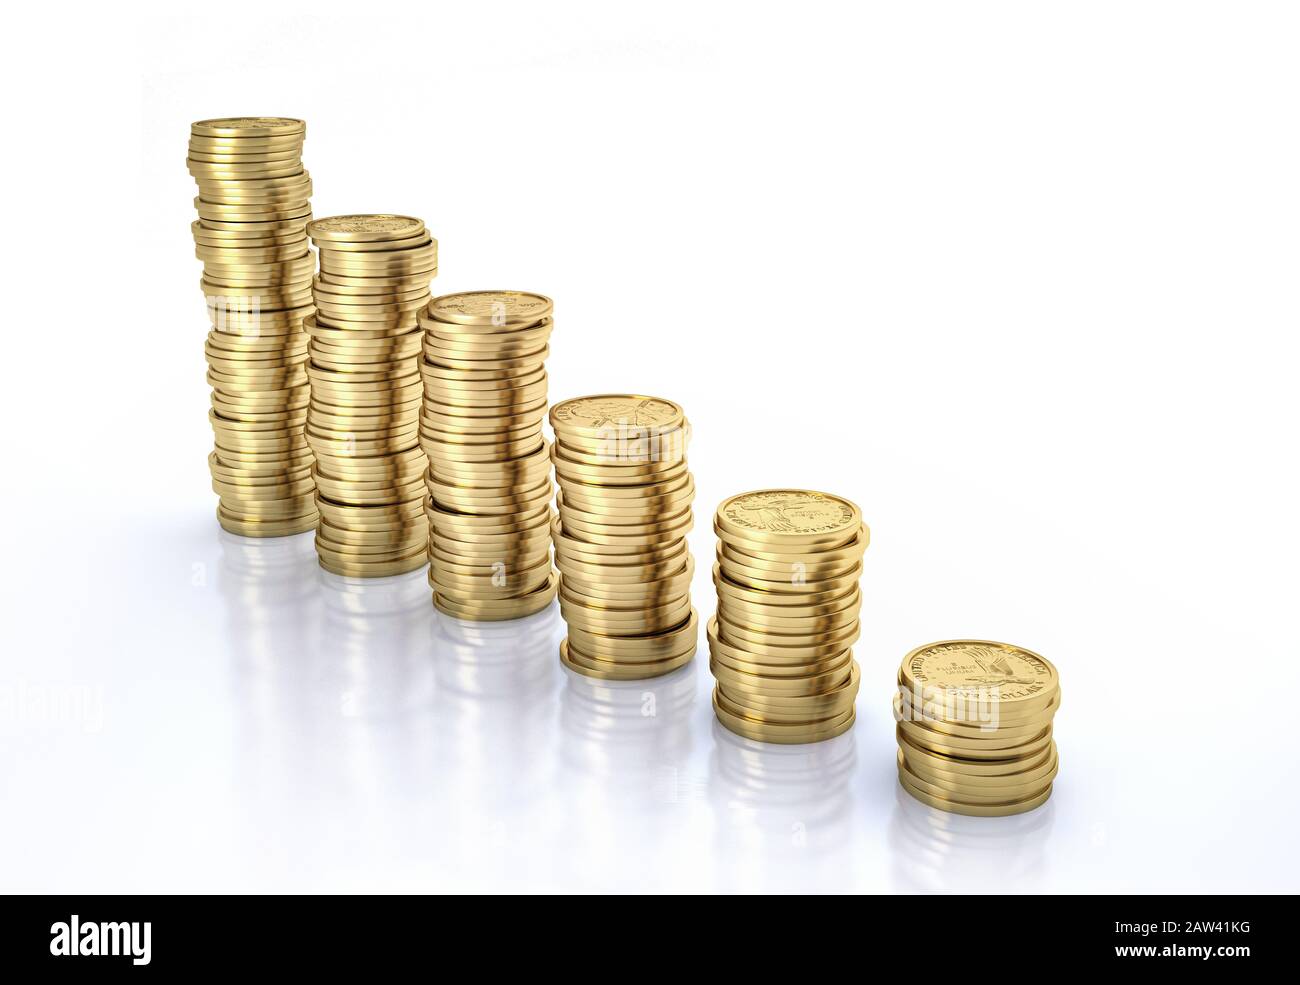 Money. Gold dollar coins stacked aligned as a stair. 3D illustration on white background. Stock Photo